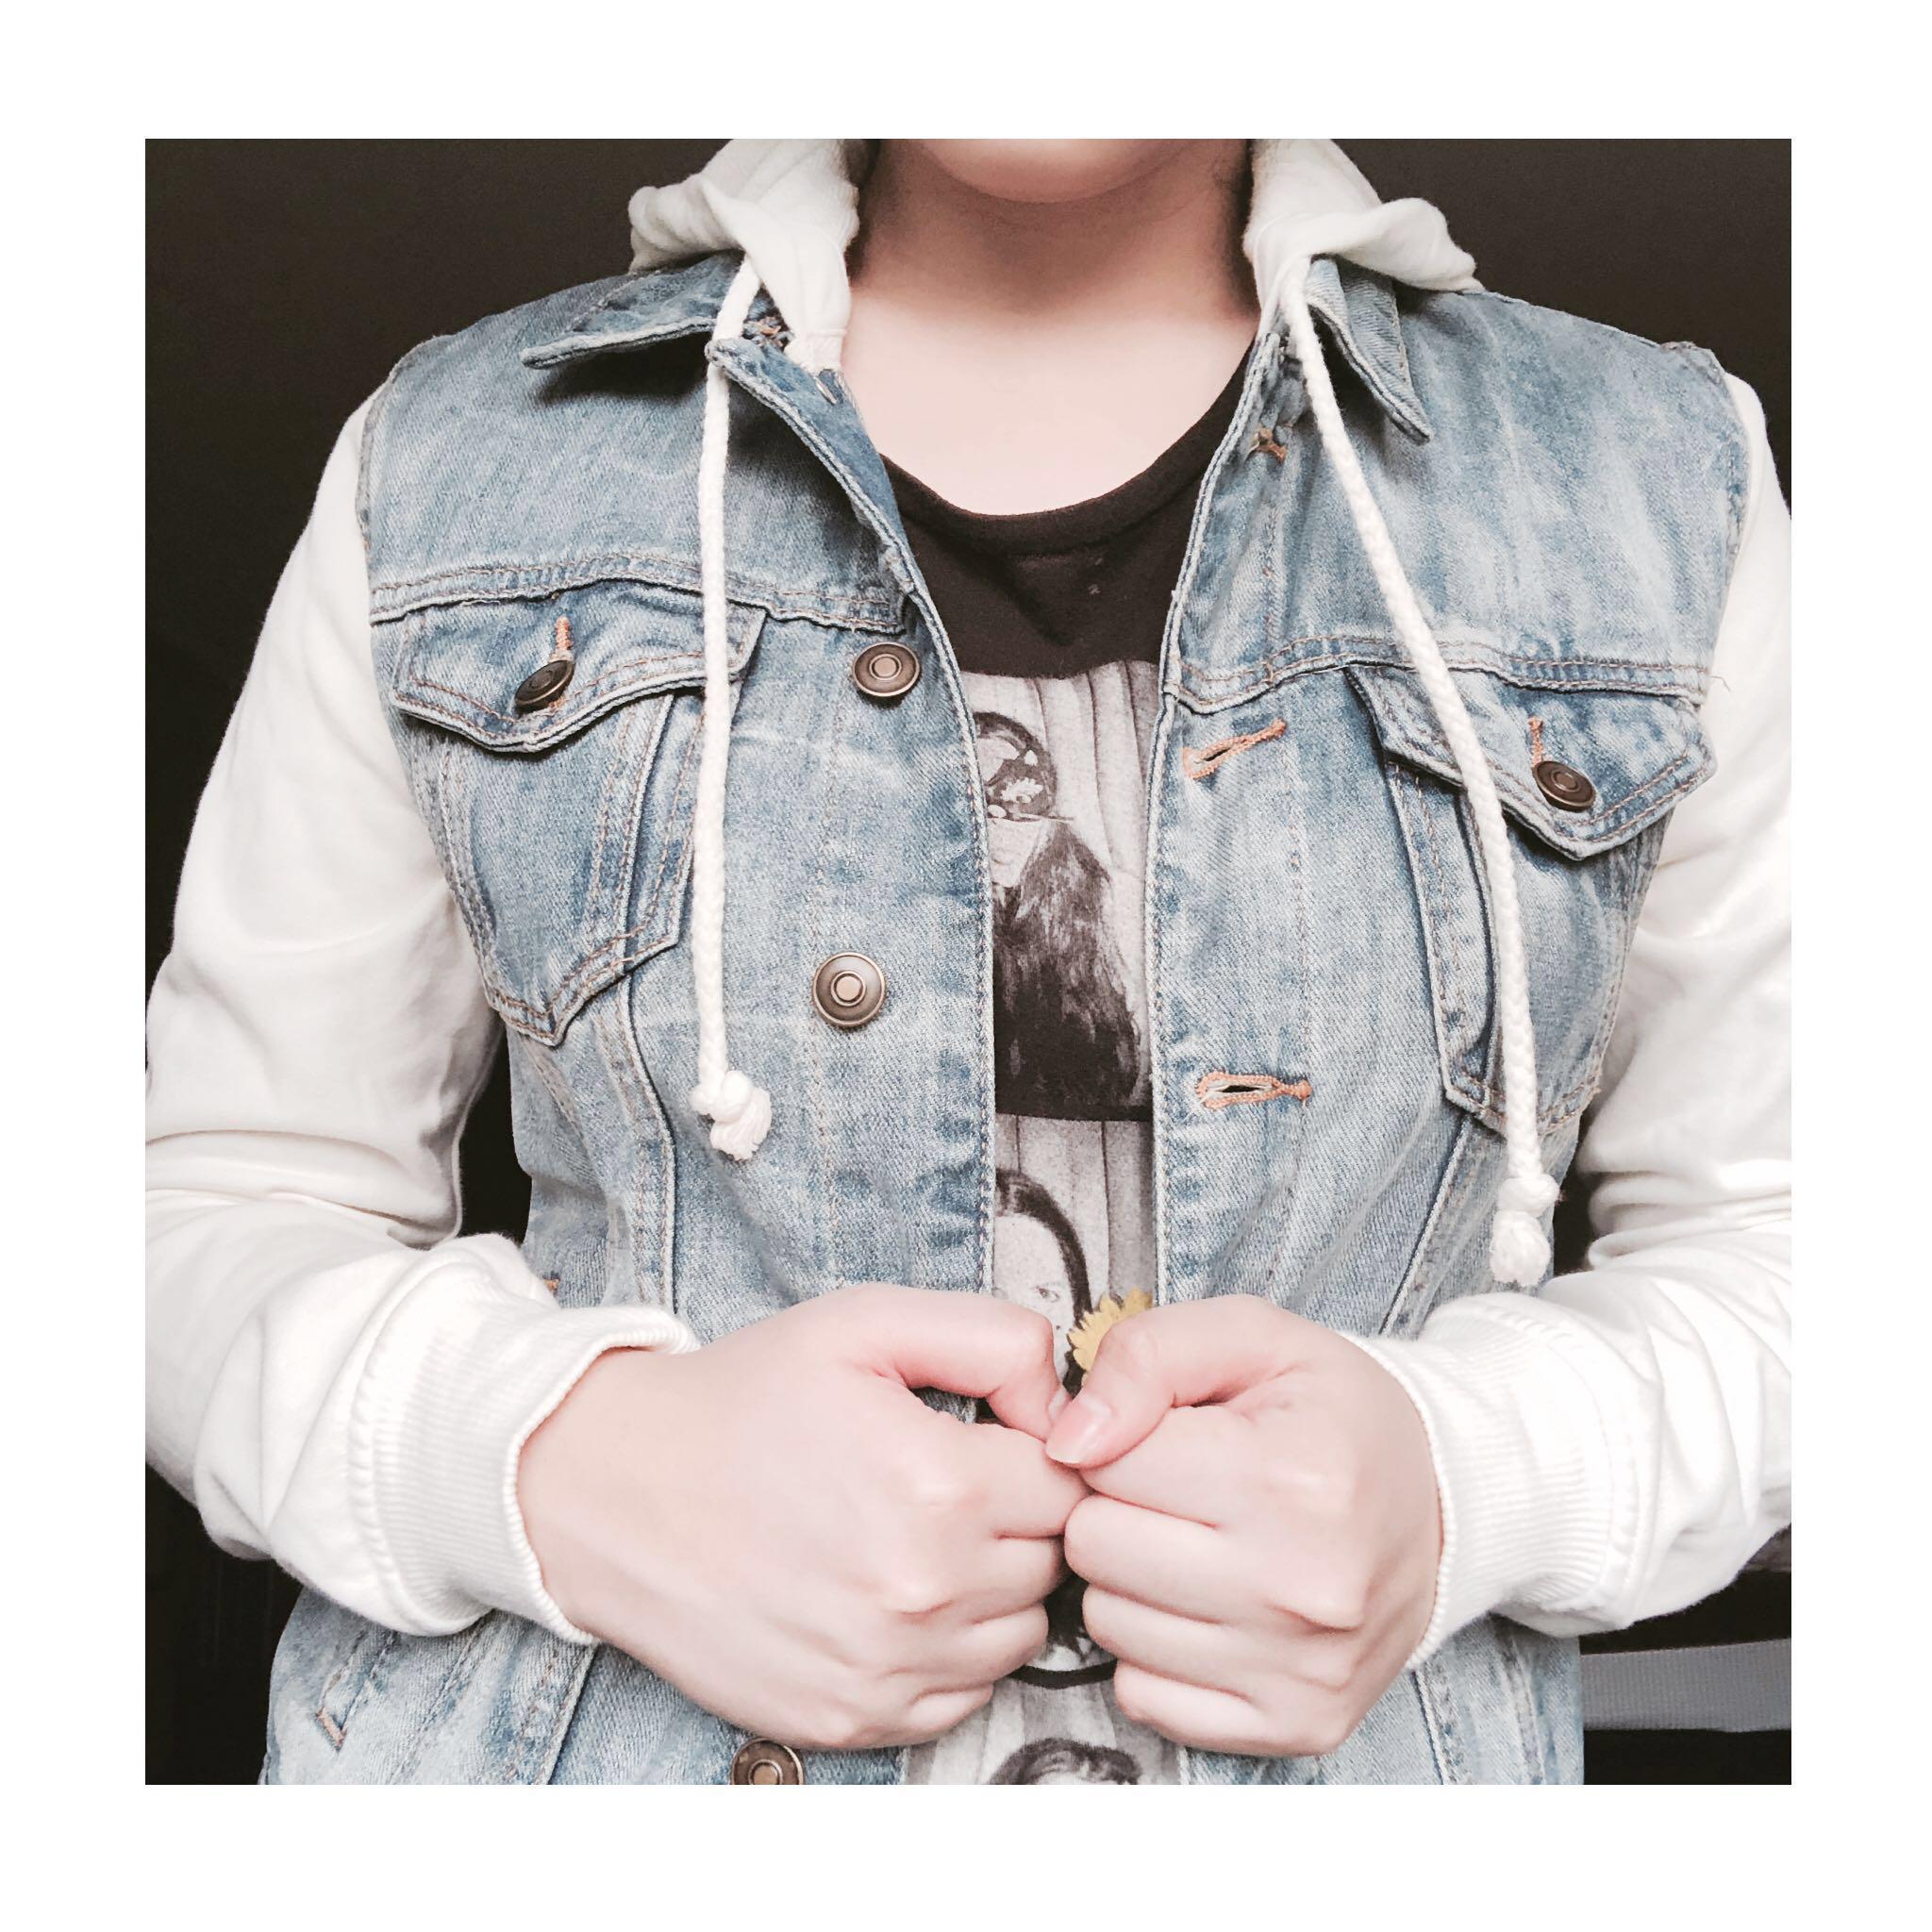 denim jacket with jersey sleeves